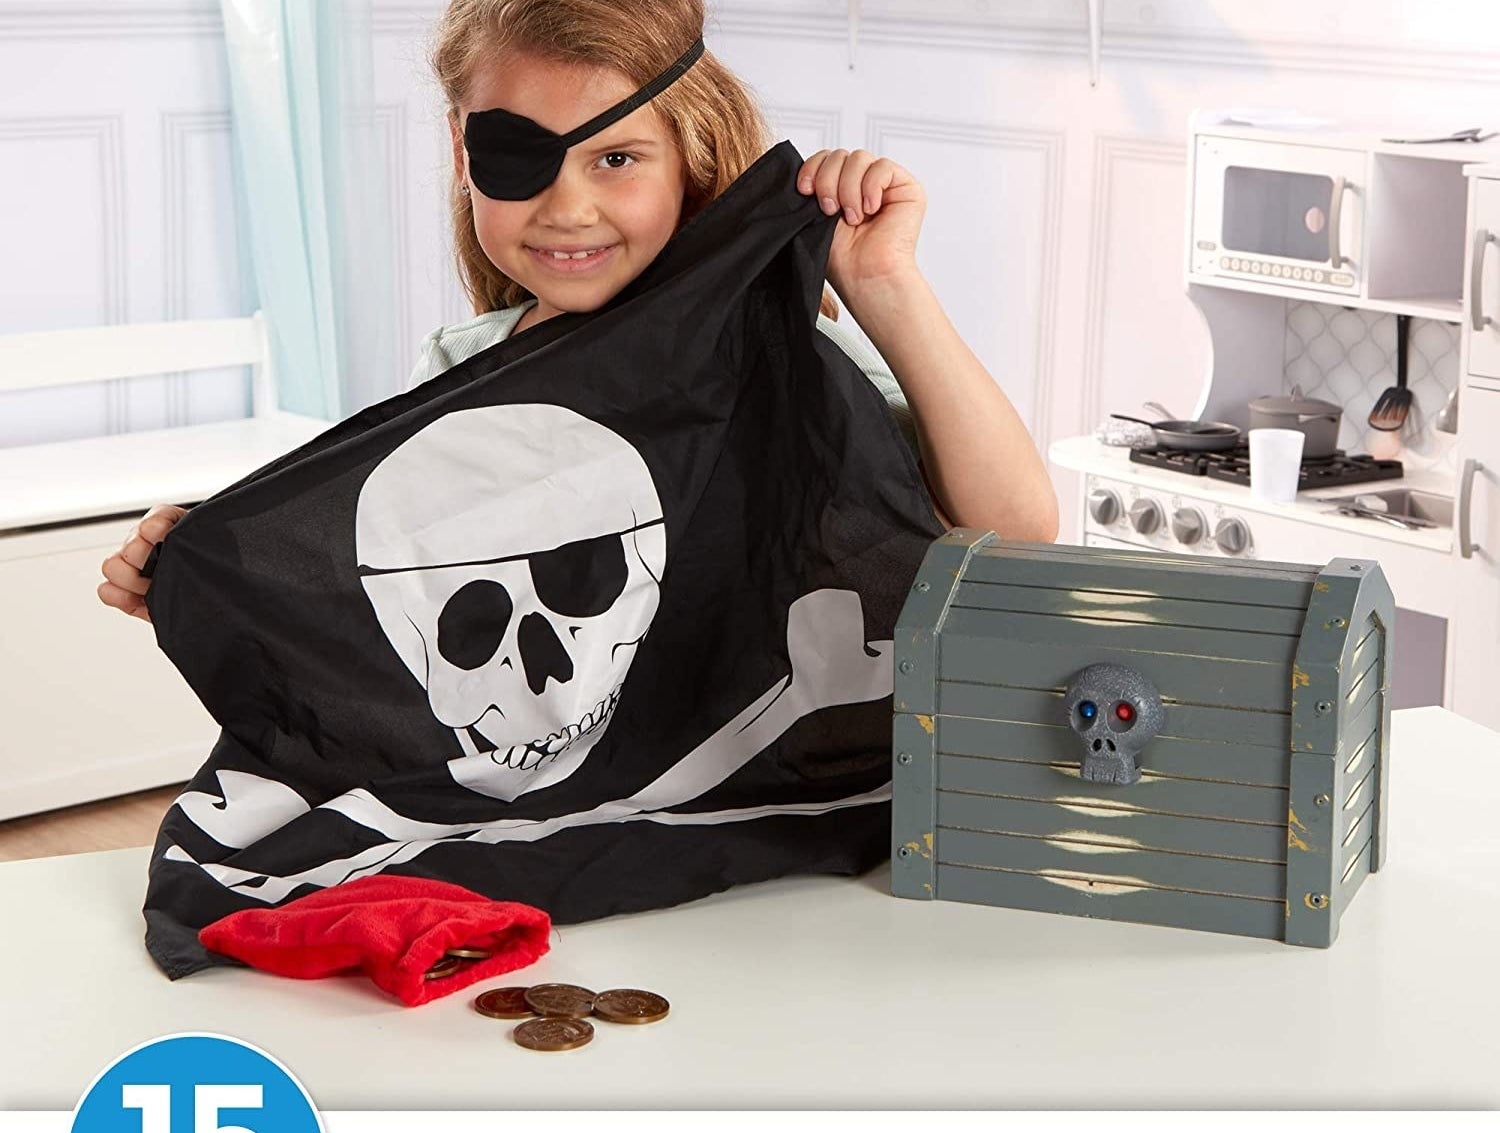 Child model holding pirate flag with toy chest and coins